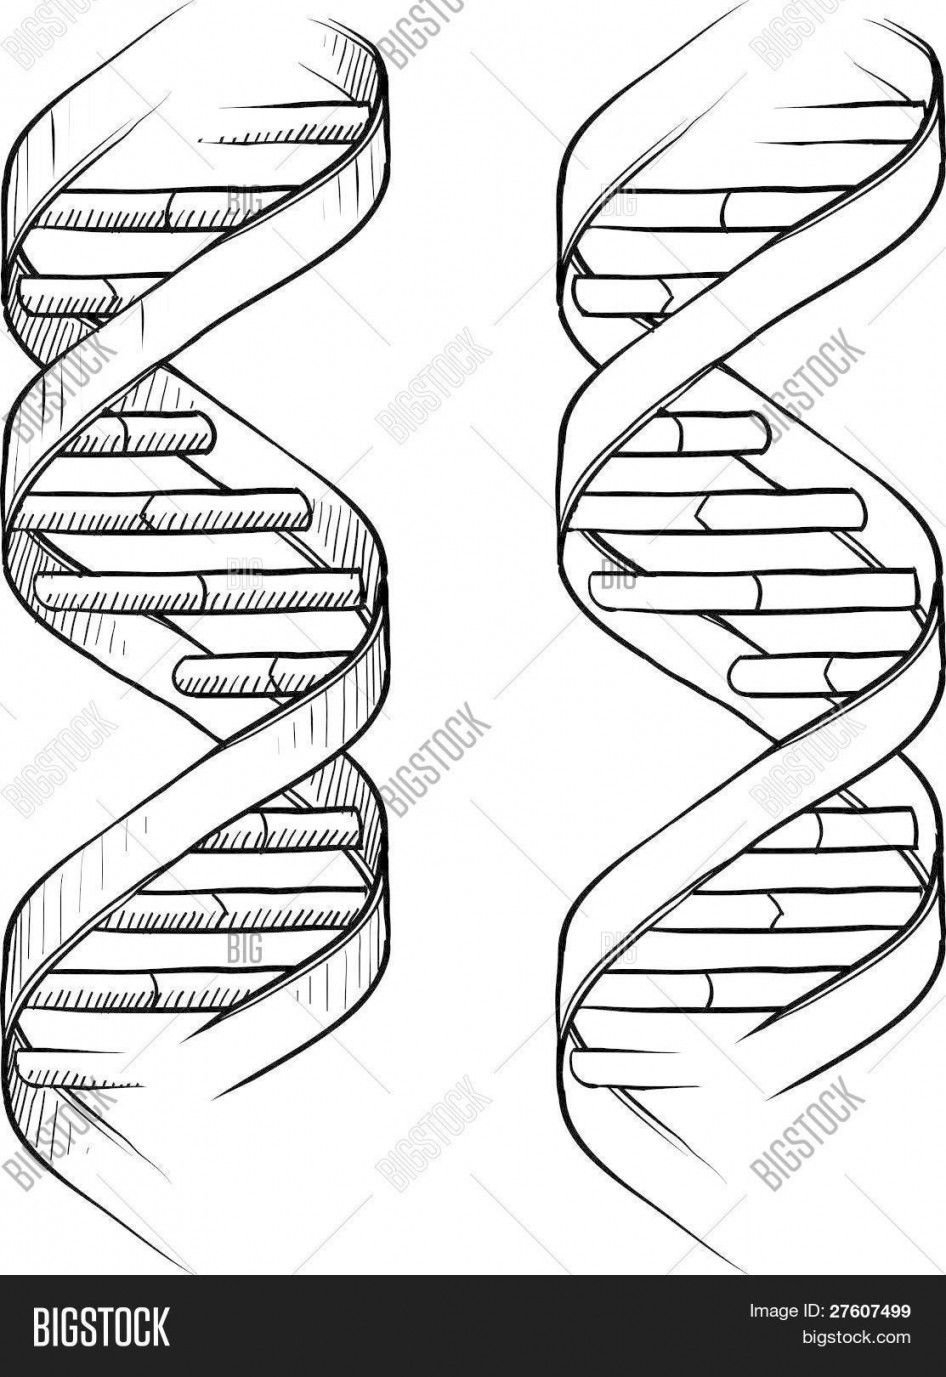 Dna The Double Helix Coloring Worksheet Answers  Briefencounters In Double Helix Coloring Worksheet Answers